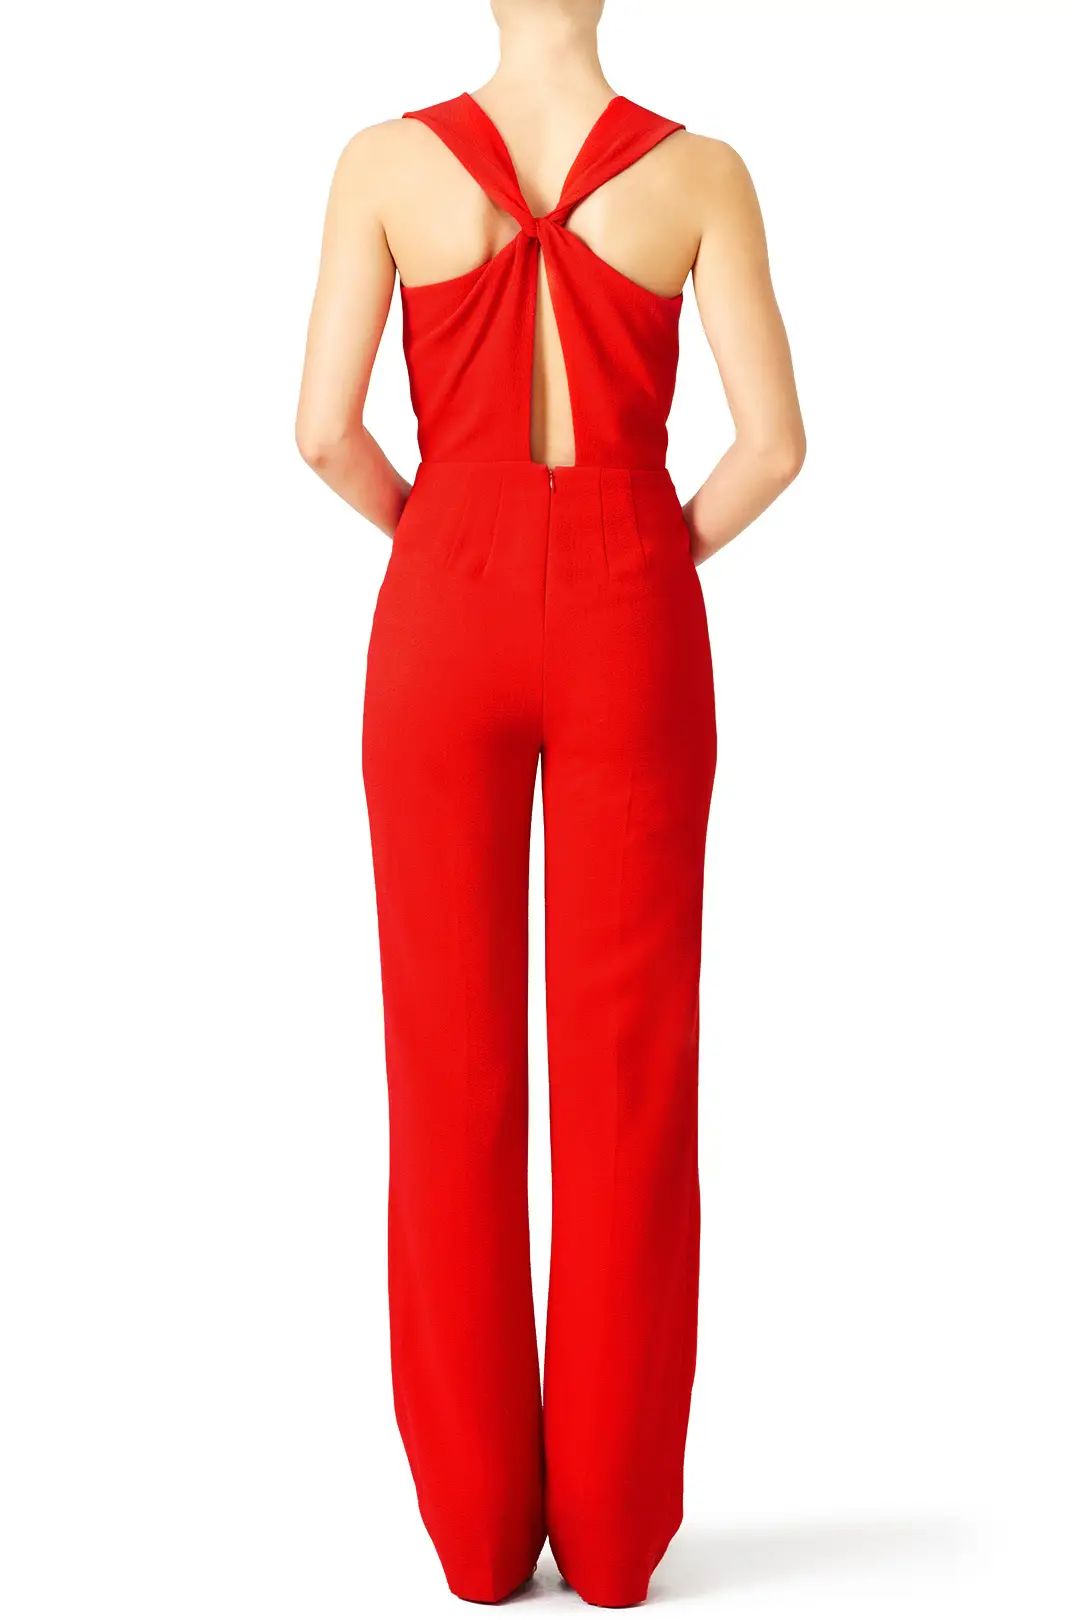 Tory Burch Red Pebbled Crepe Jumpsuit | Rent The Runway